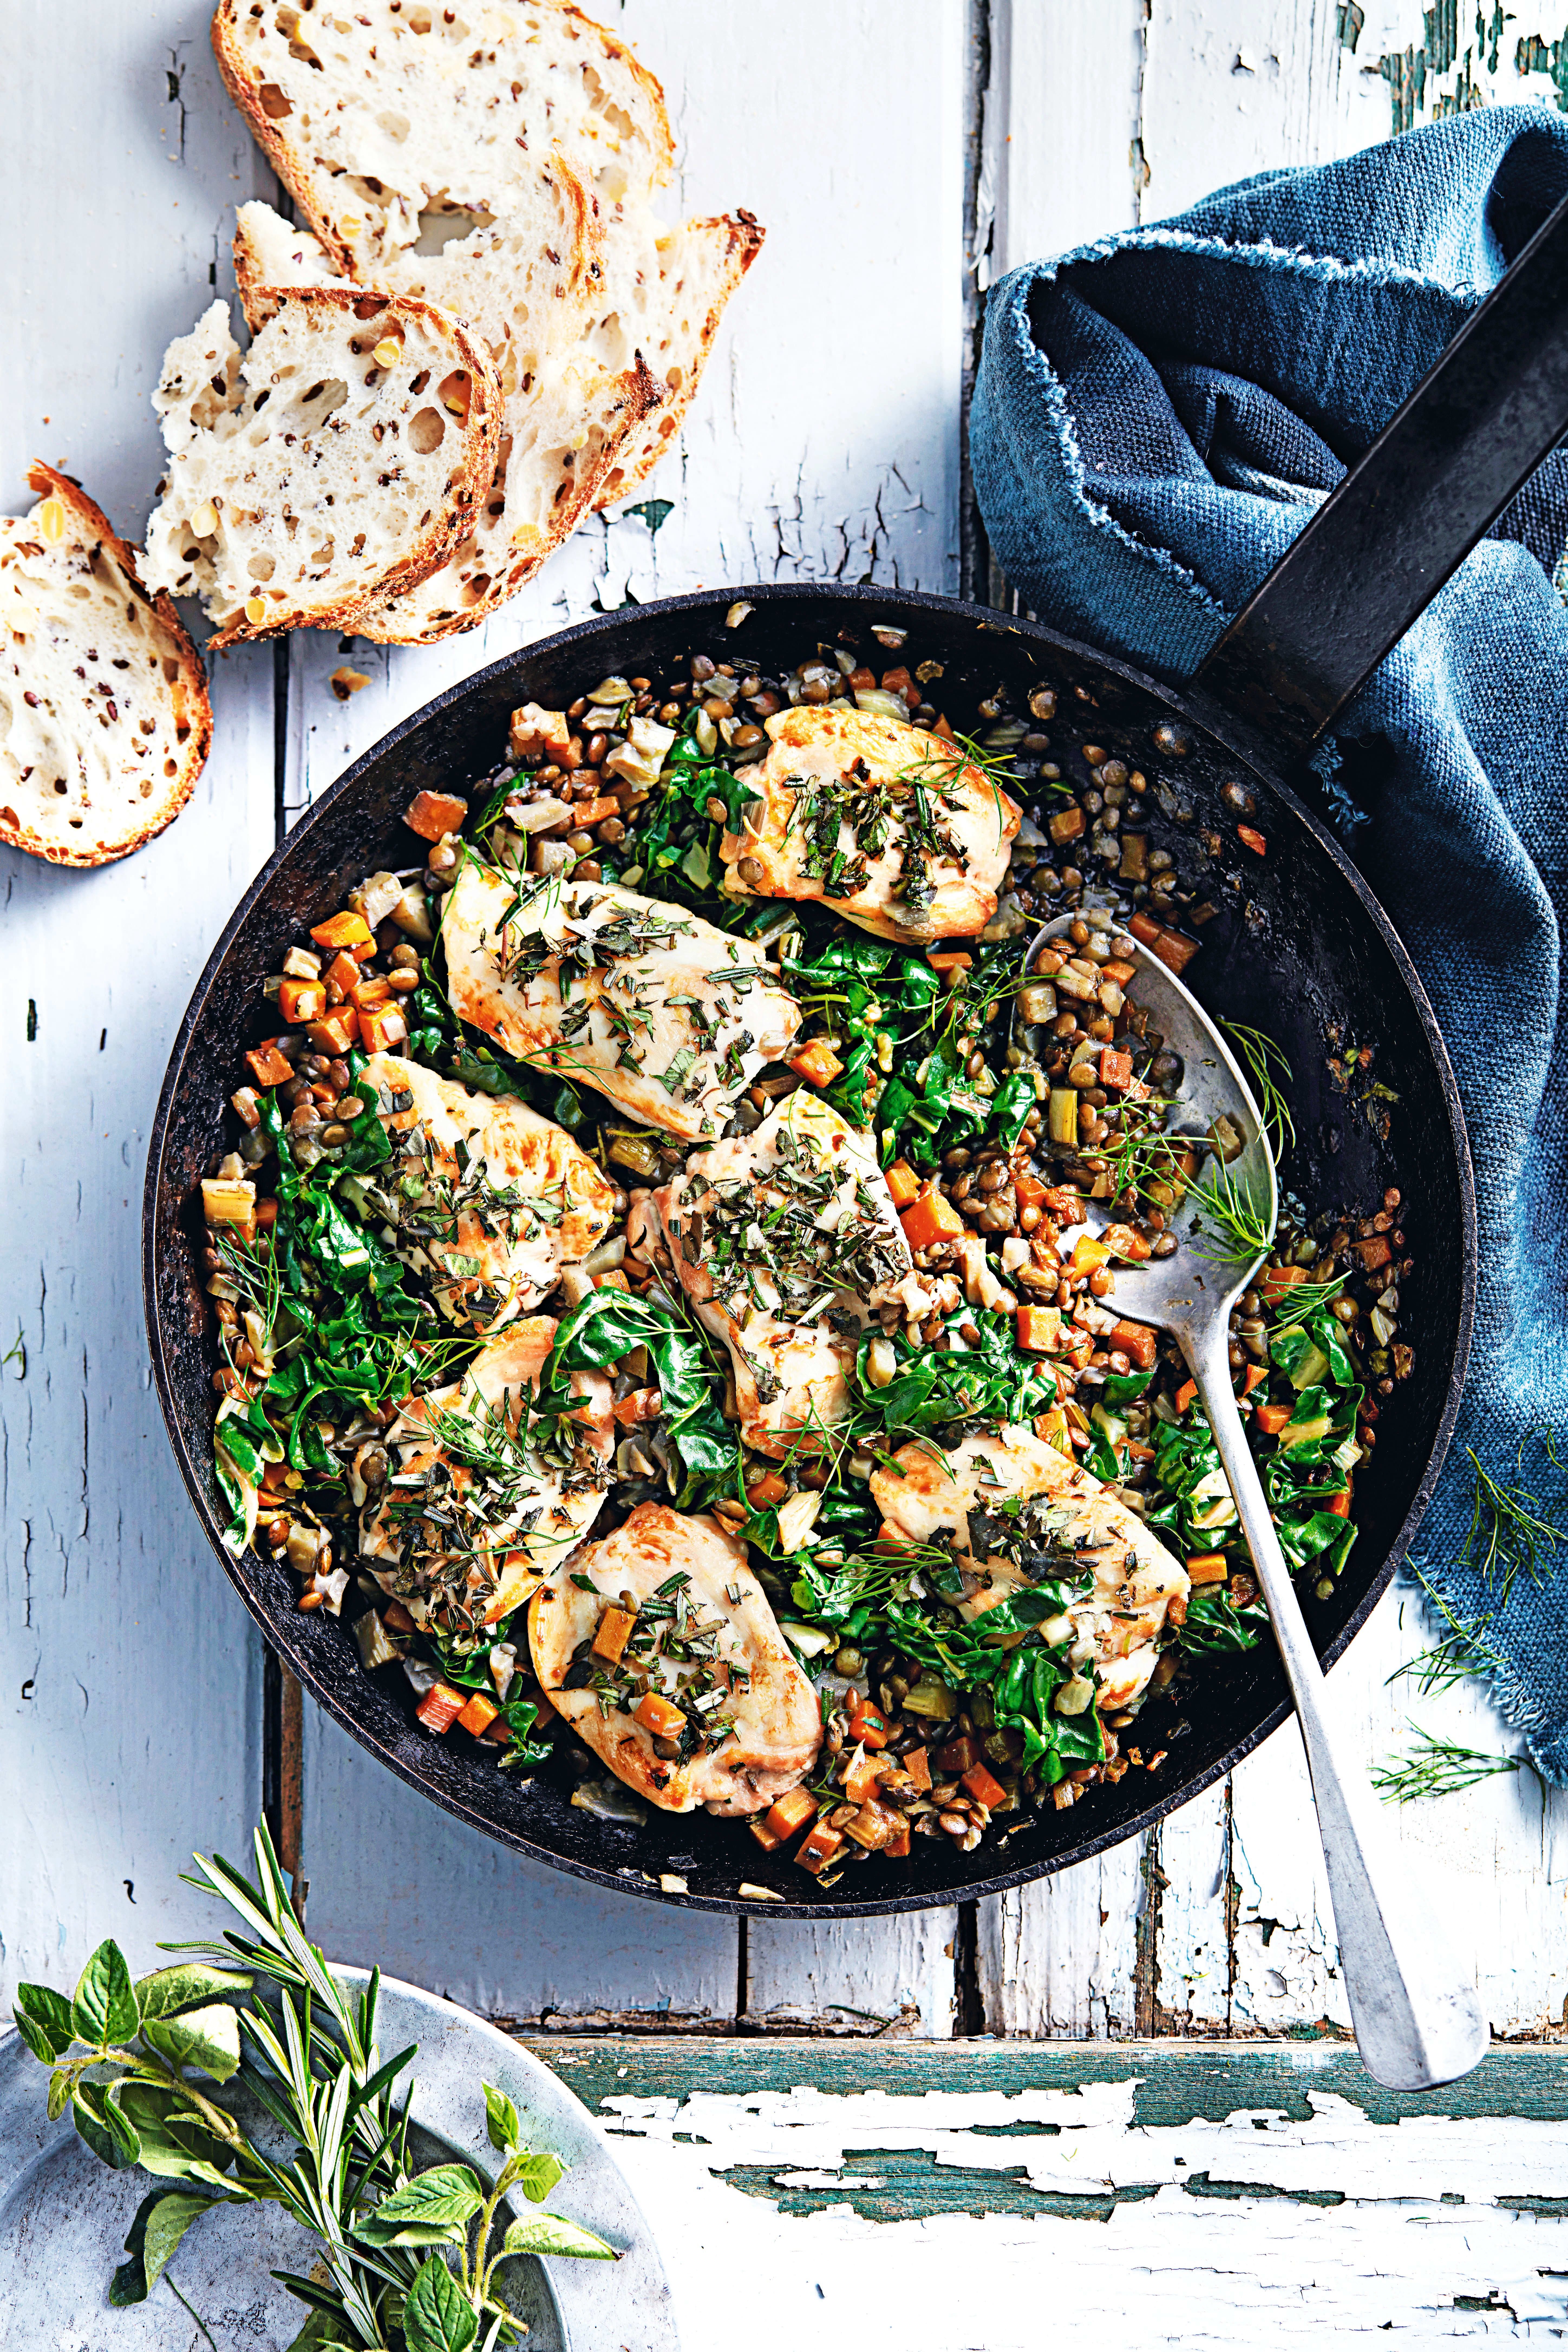 Photo of Braised chicken & lentils by WW